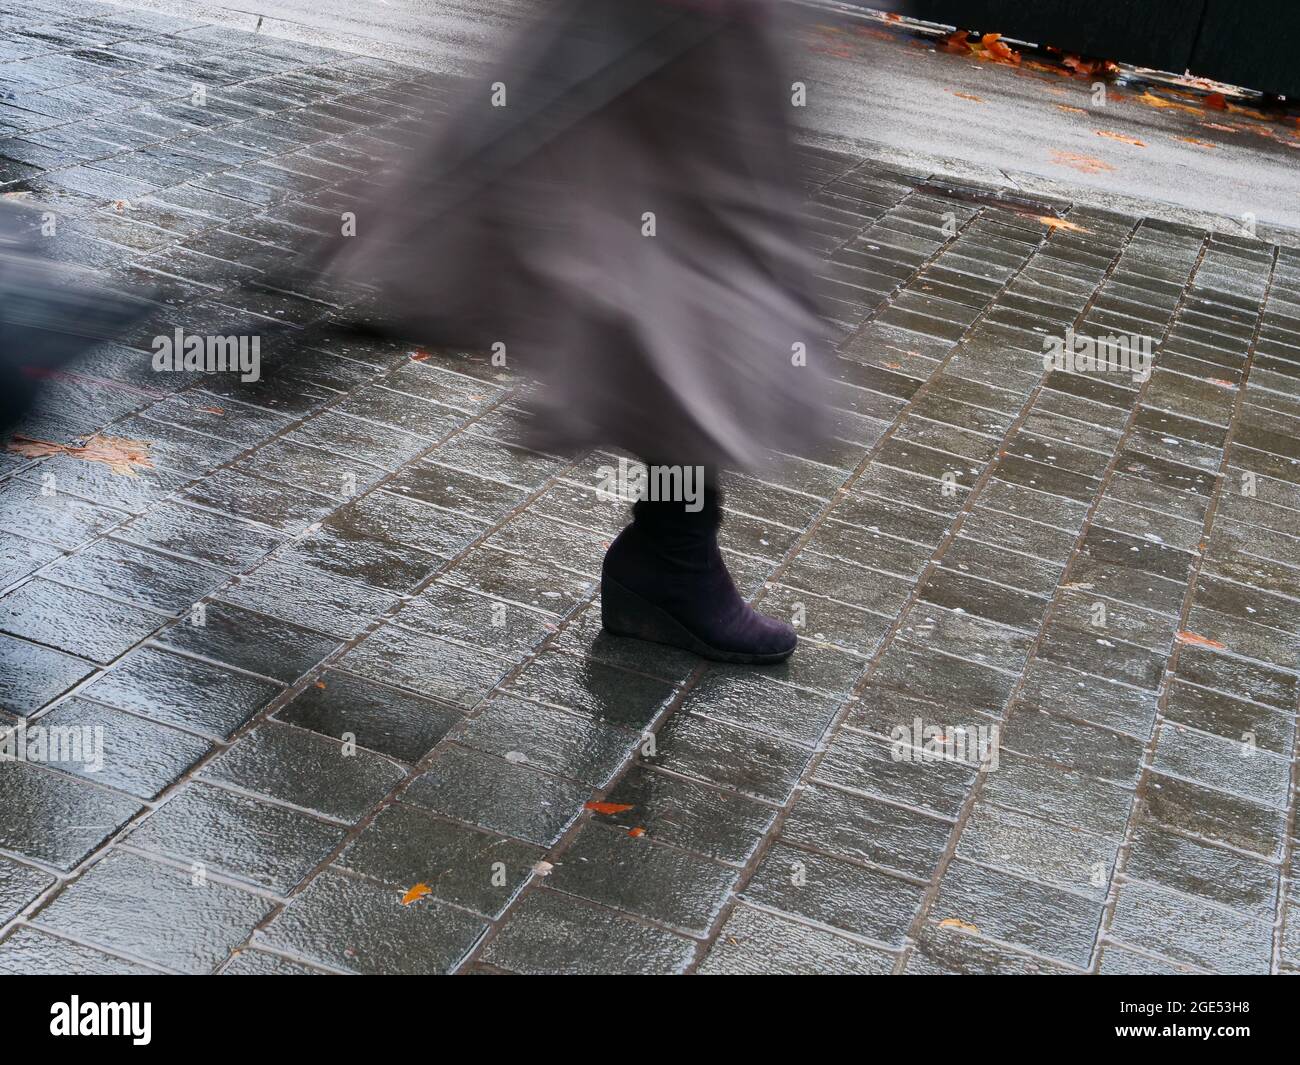 Person seen fast walking in a rainy street. Stock Photo